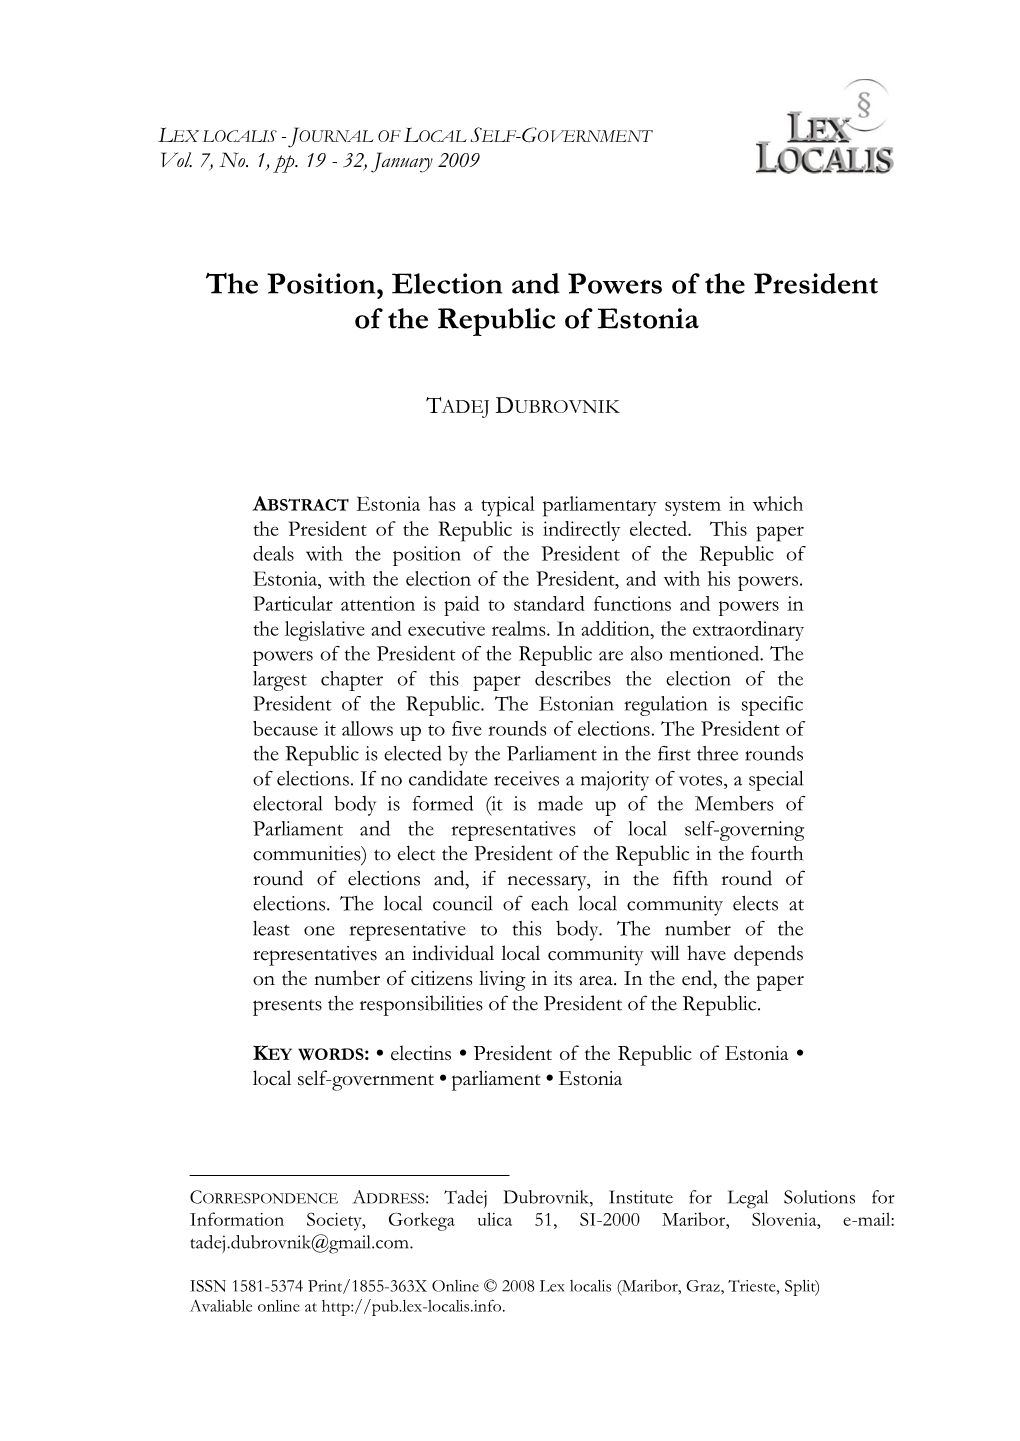 The Position, Election and Powers of the President of the Republic of Estonia